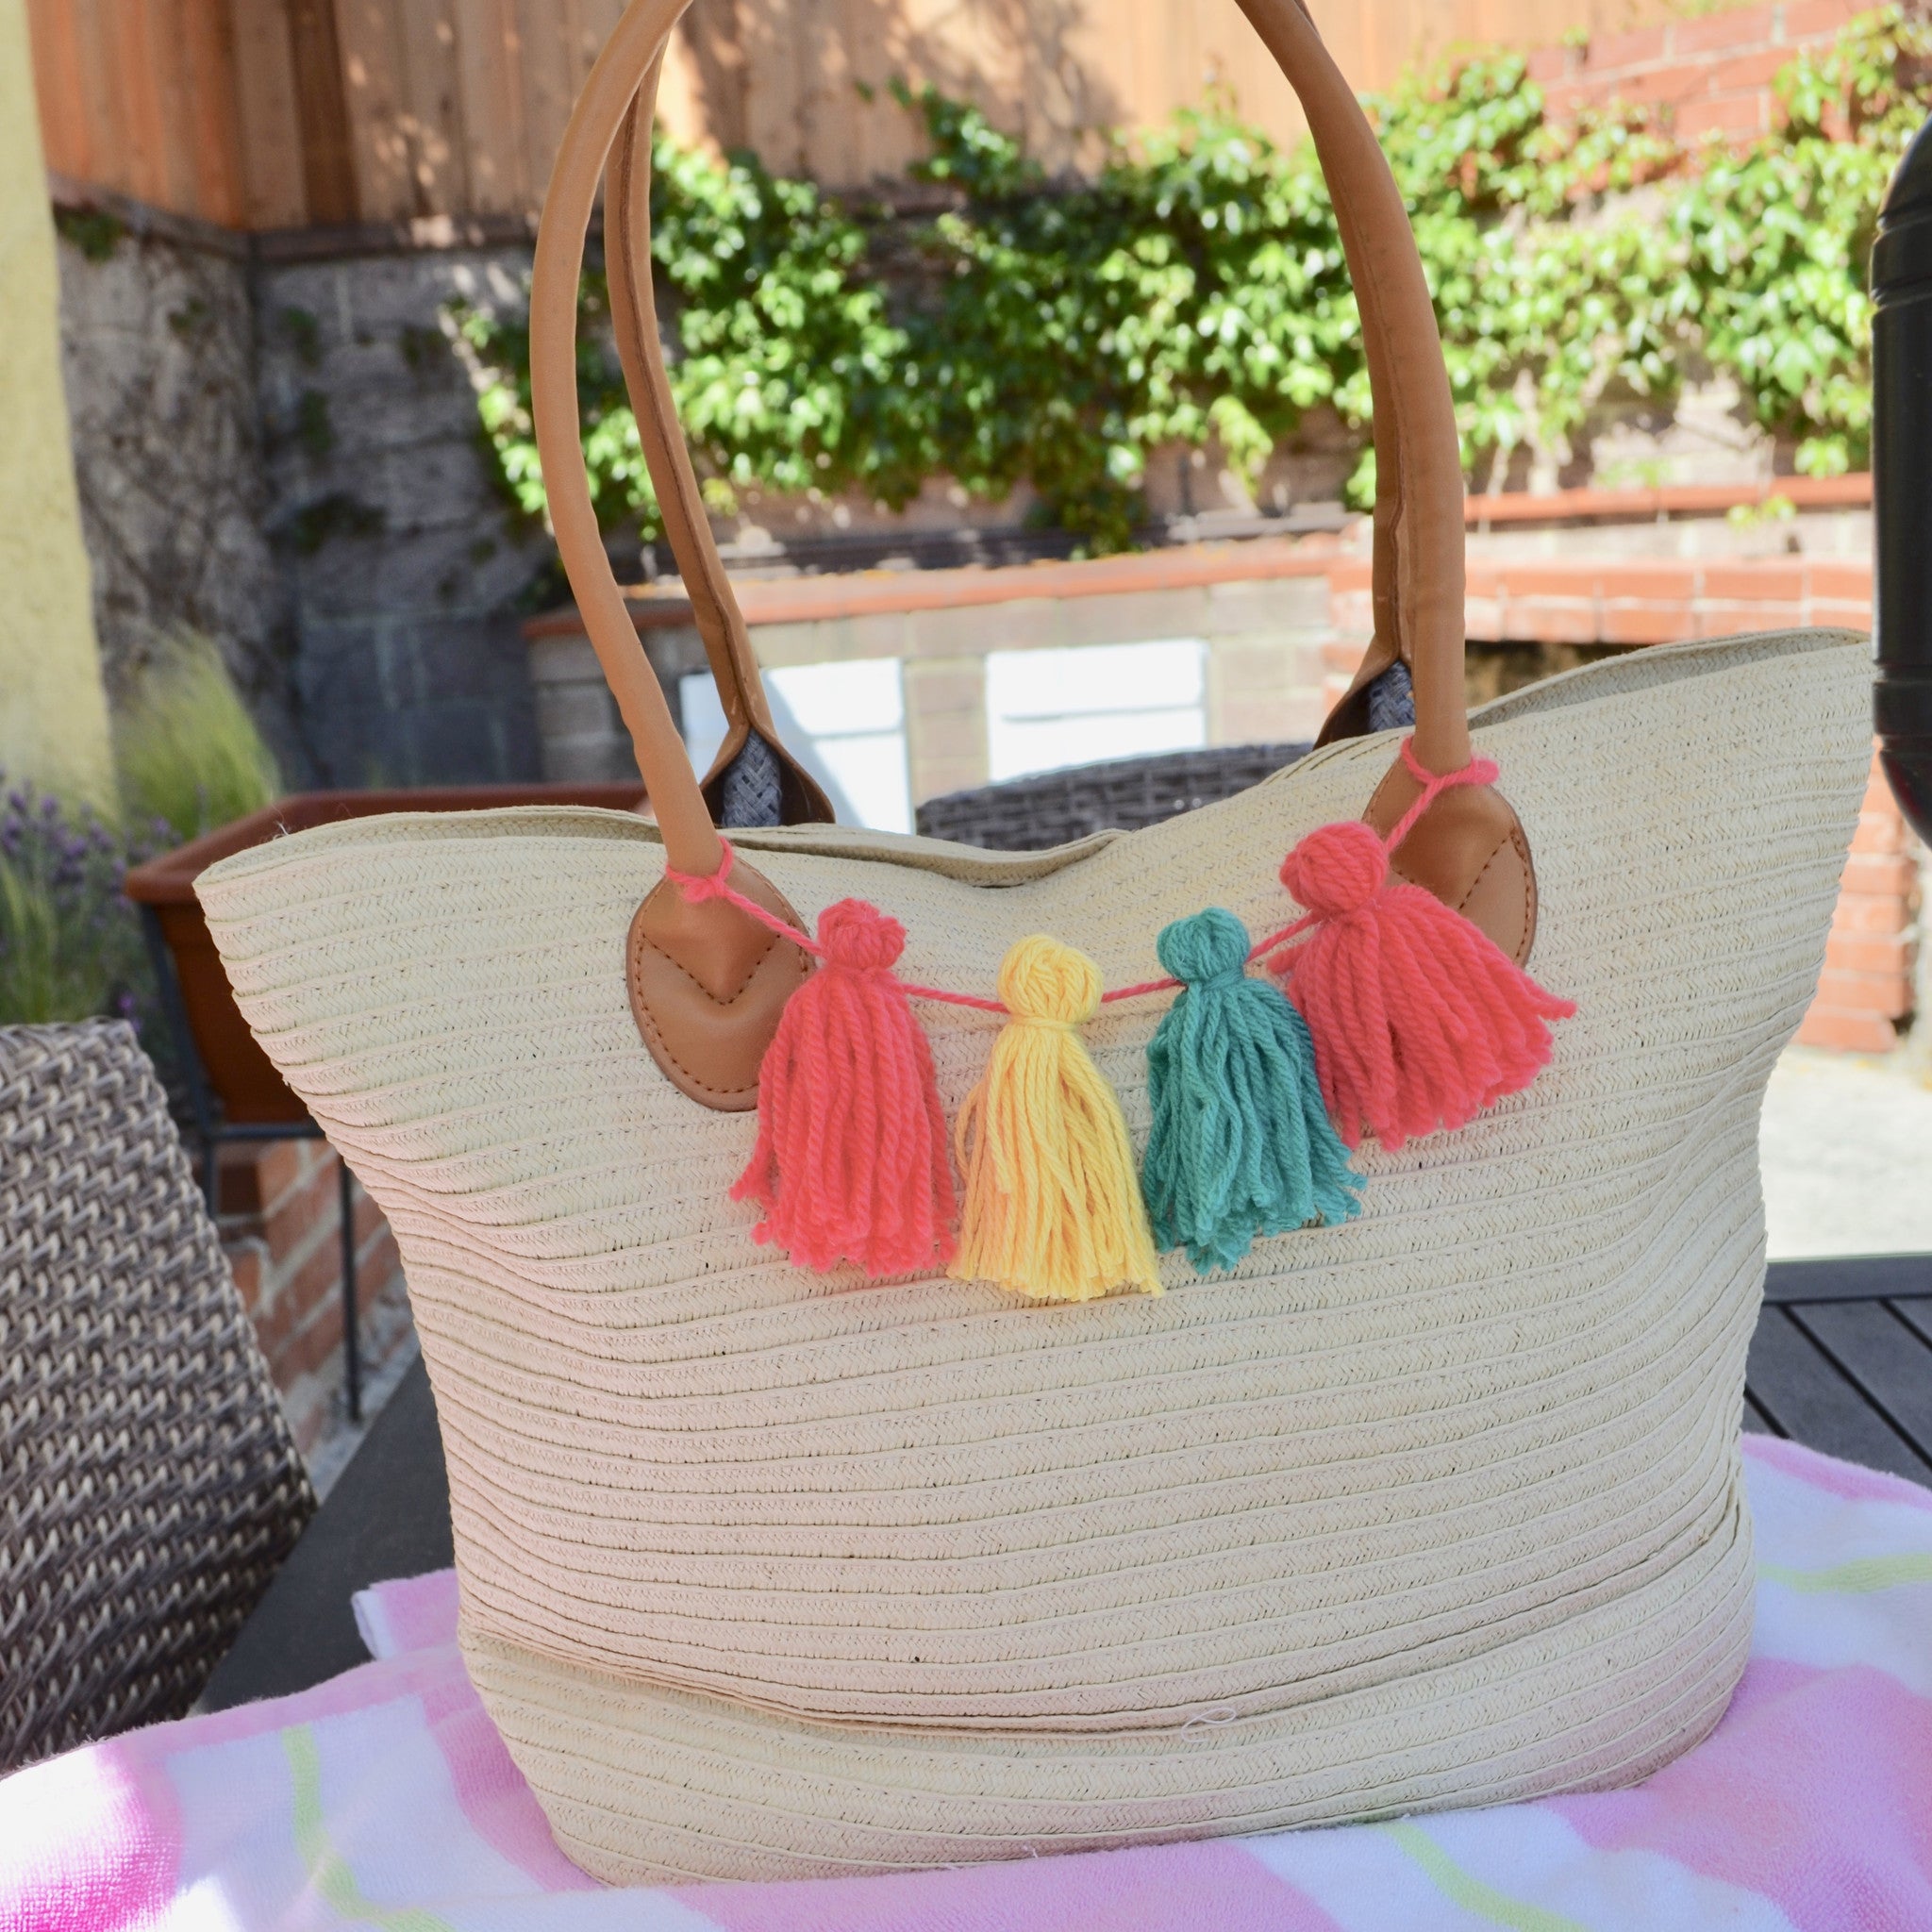 Rope Basket Purse Tutorial: The Perfect Summer Bag!